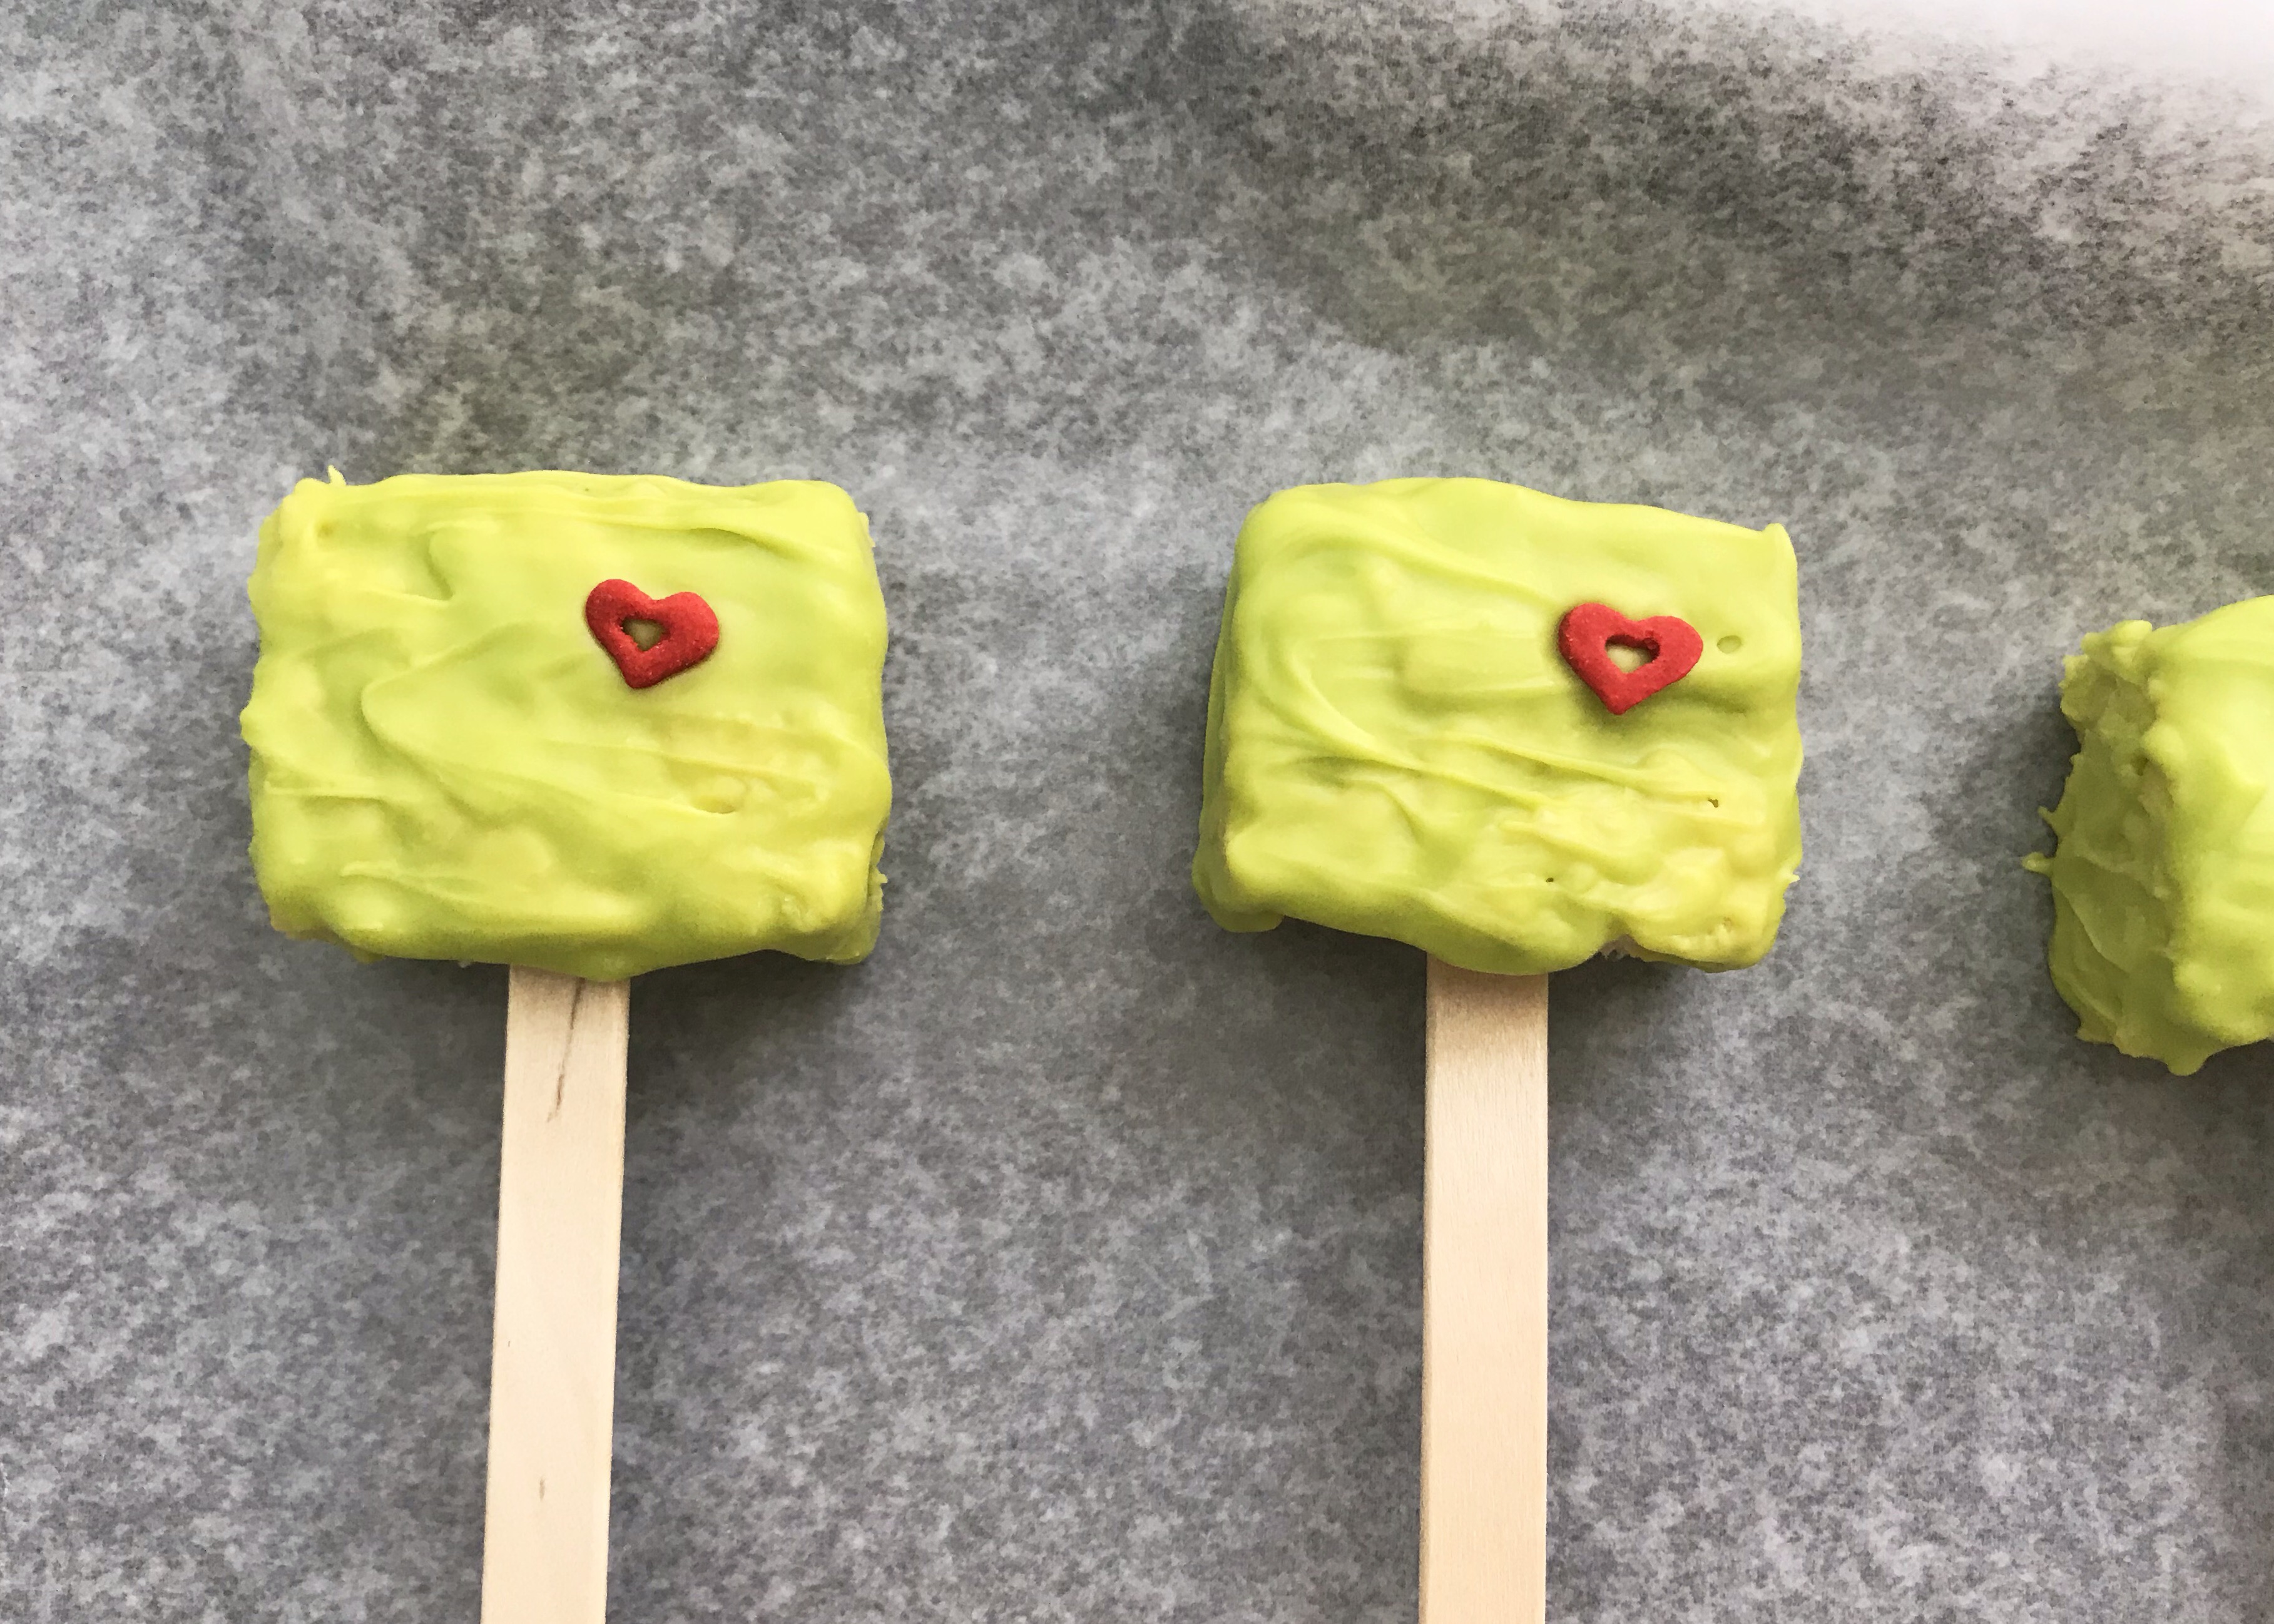 Looking for a fun Grinch treat? These simple to make Grinch Pops, which are Grinch Rice Crispy Treats will be a hit whether you make them for the kids, for a party or for a get-together. I think even the Grinch's heart would grow with these easy Christmas treats.